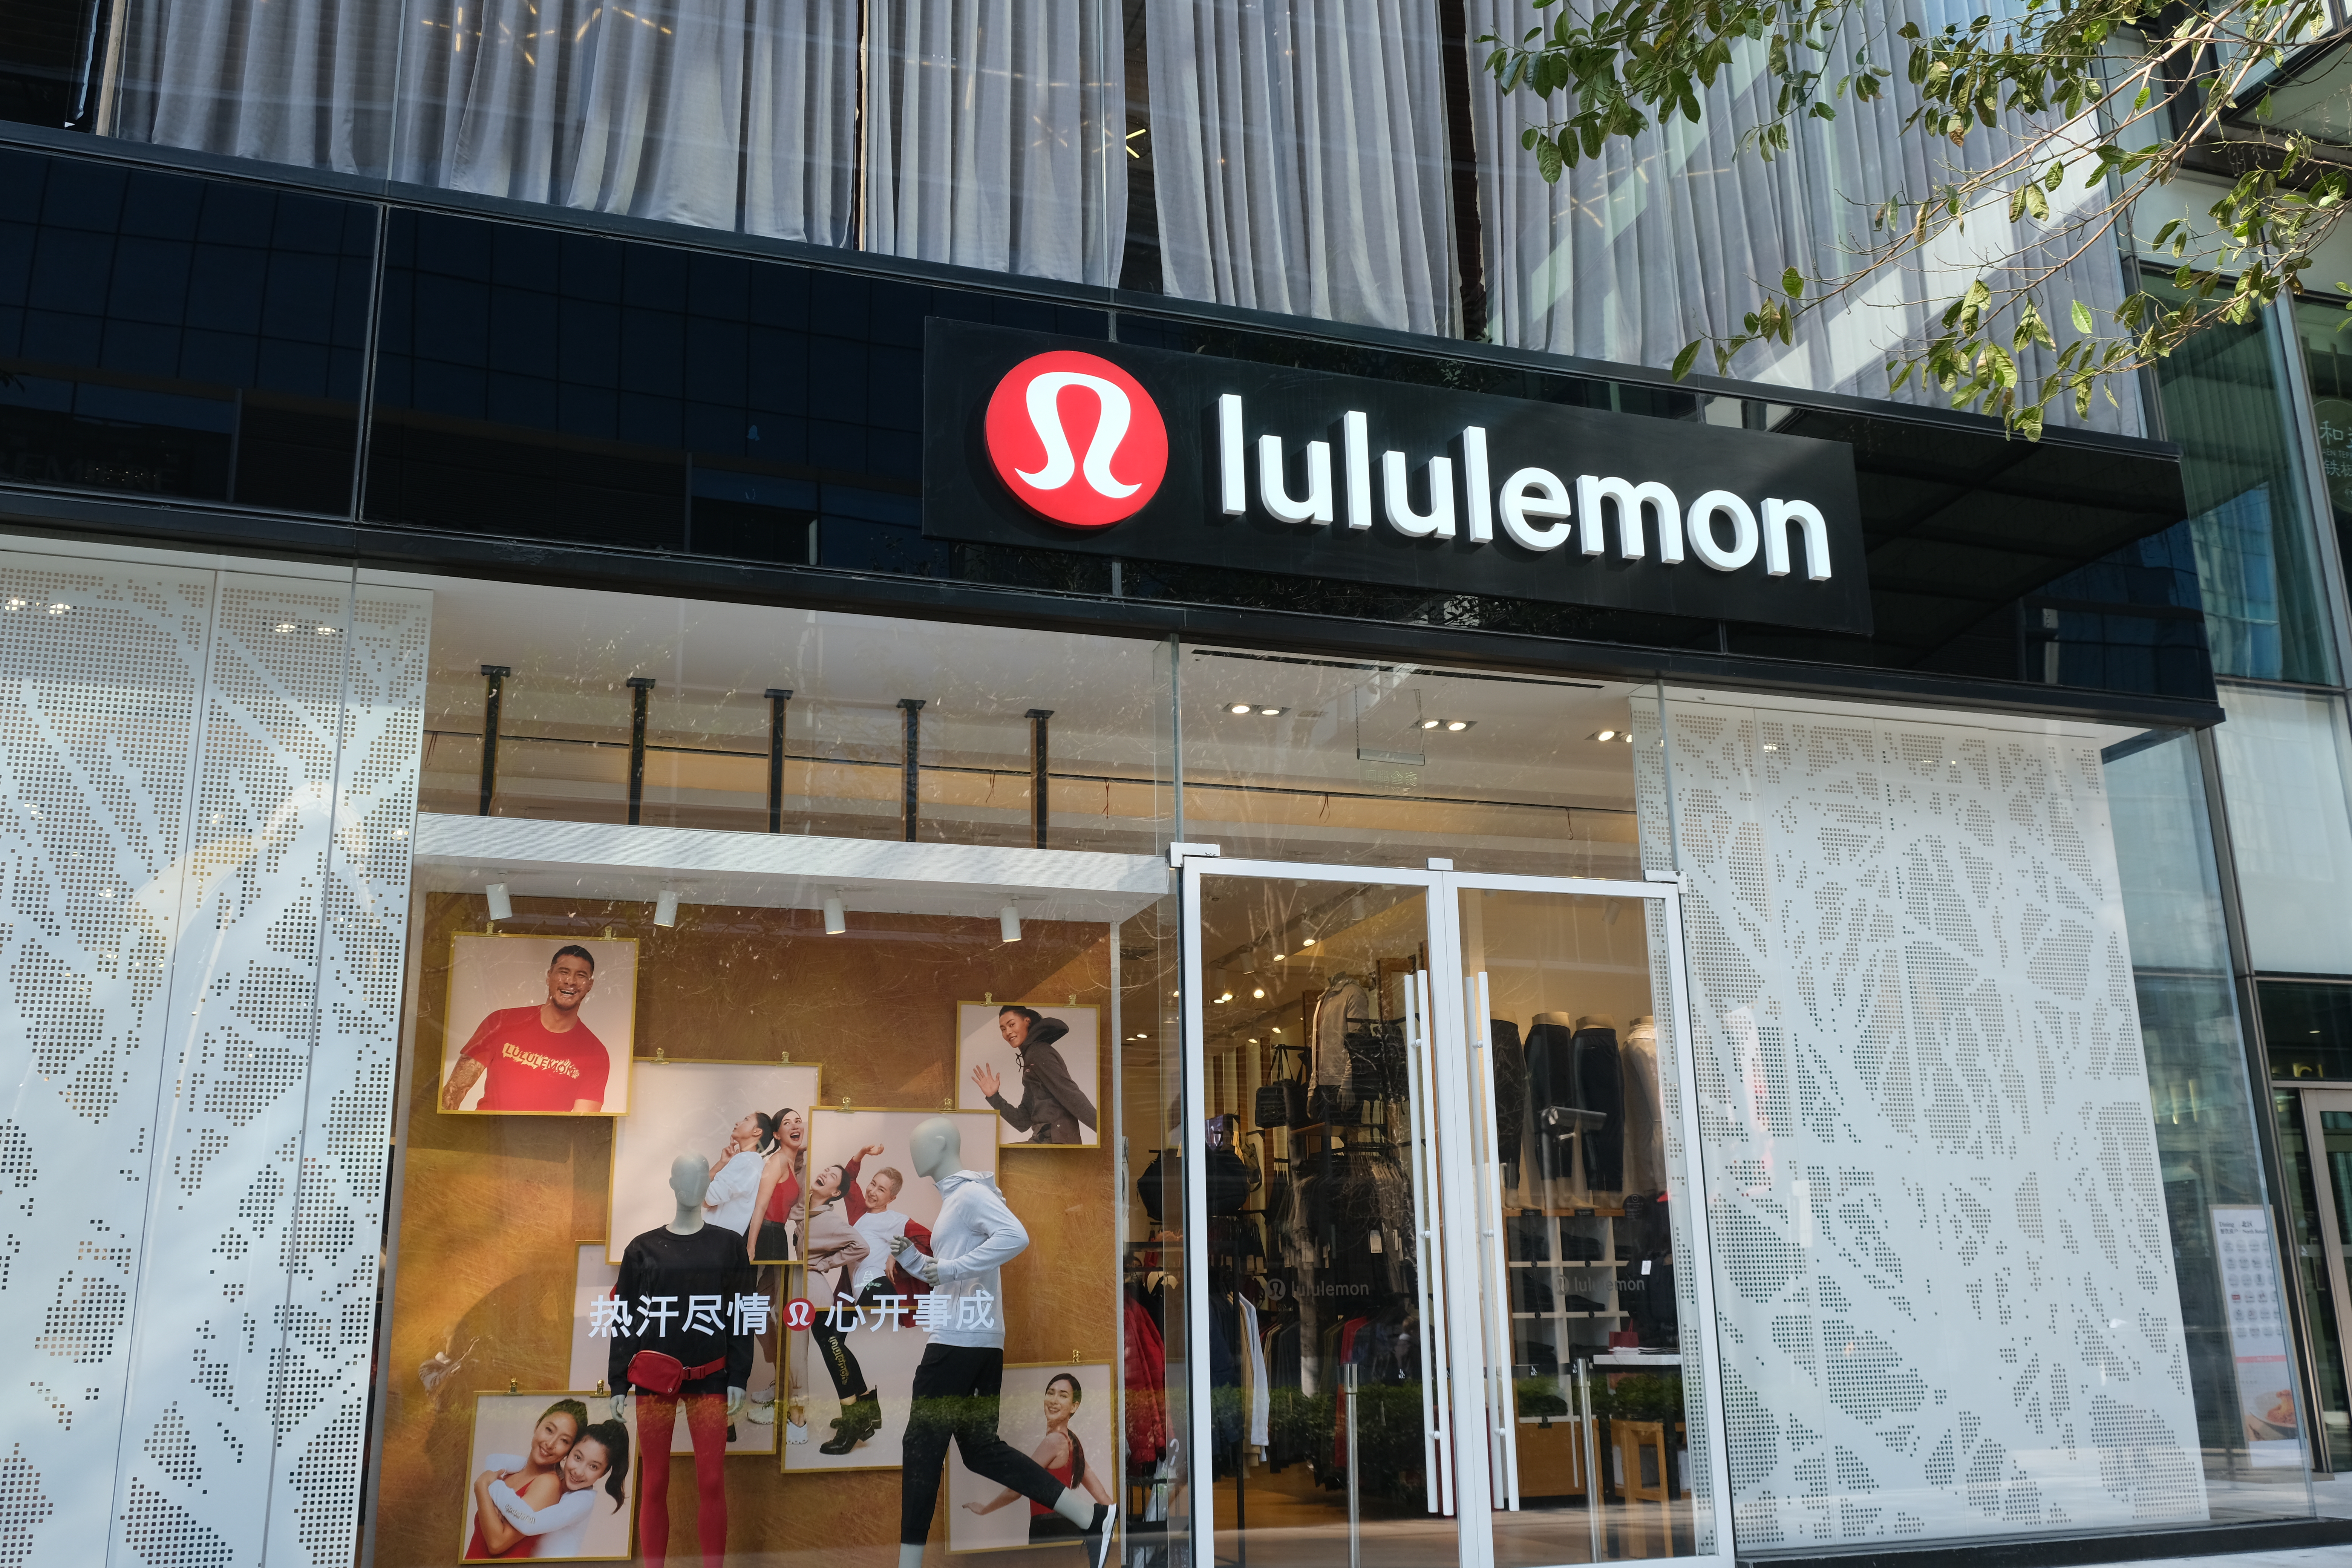 Shopping Lululemon for Tall Clothing - The Real Tall